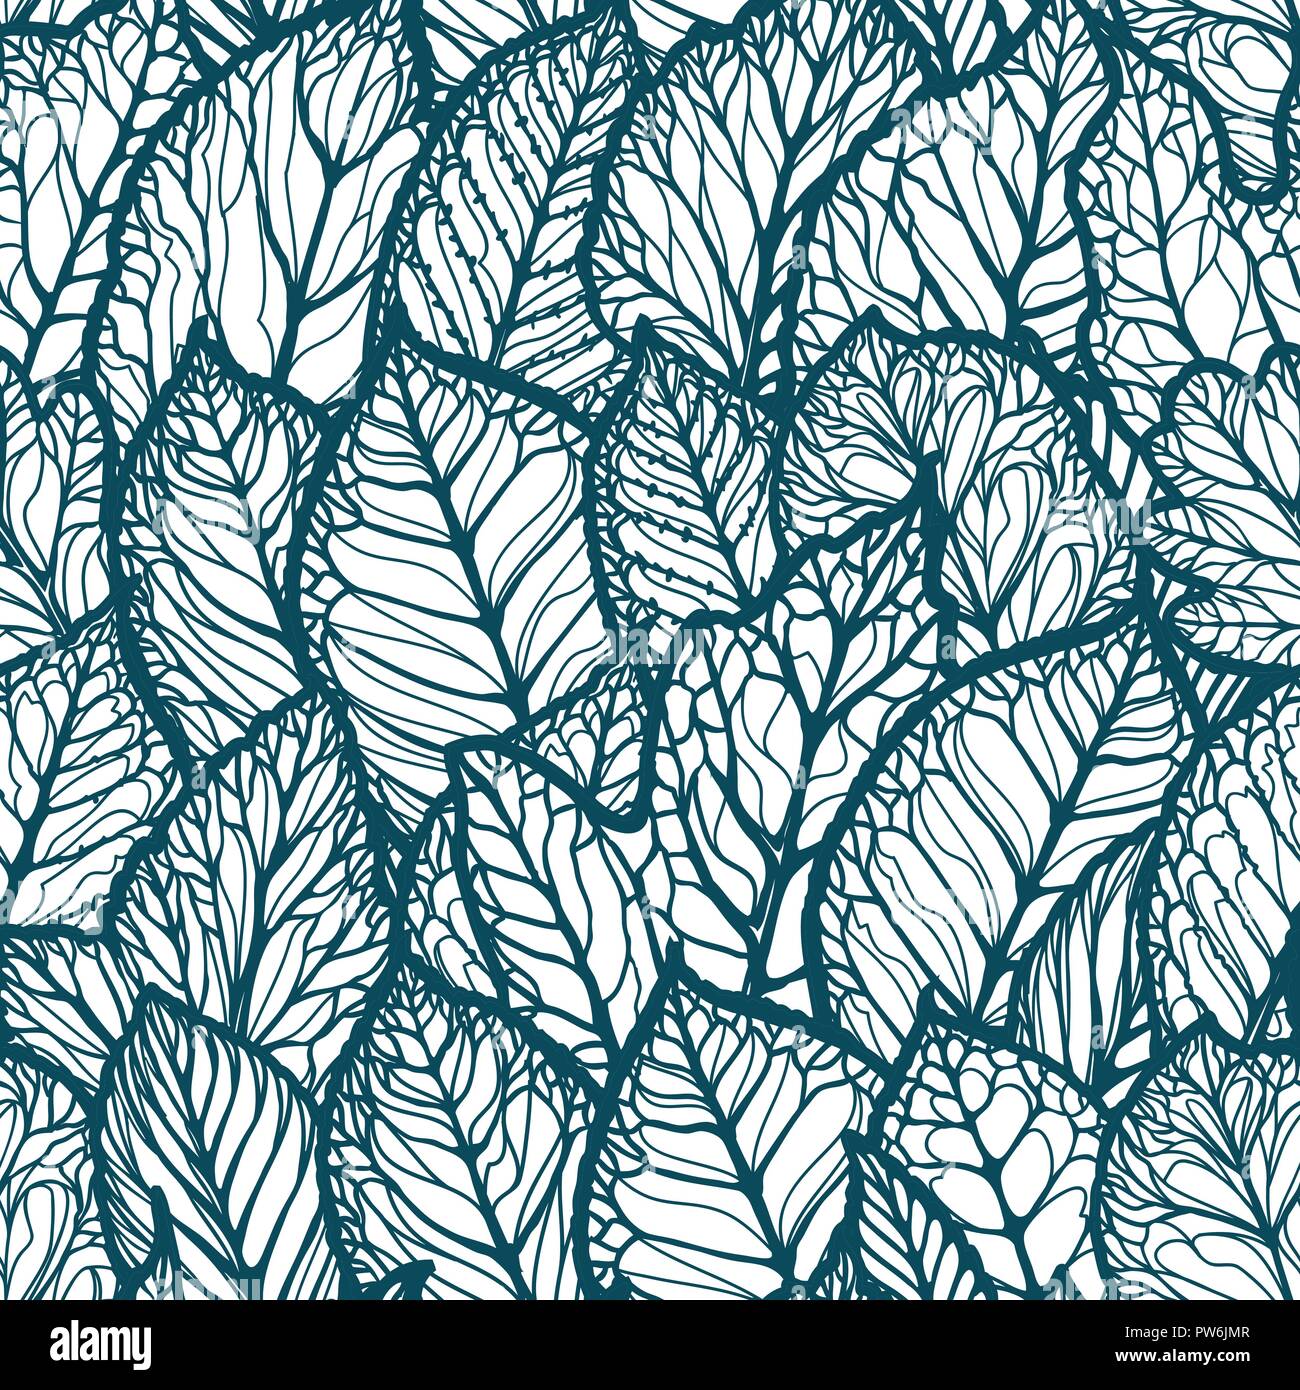 Floral pattern. Decorative leaves. Seamless background vector illustration Stock Vector